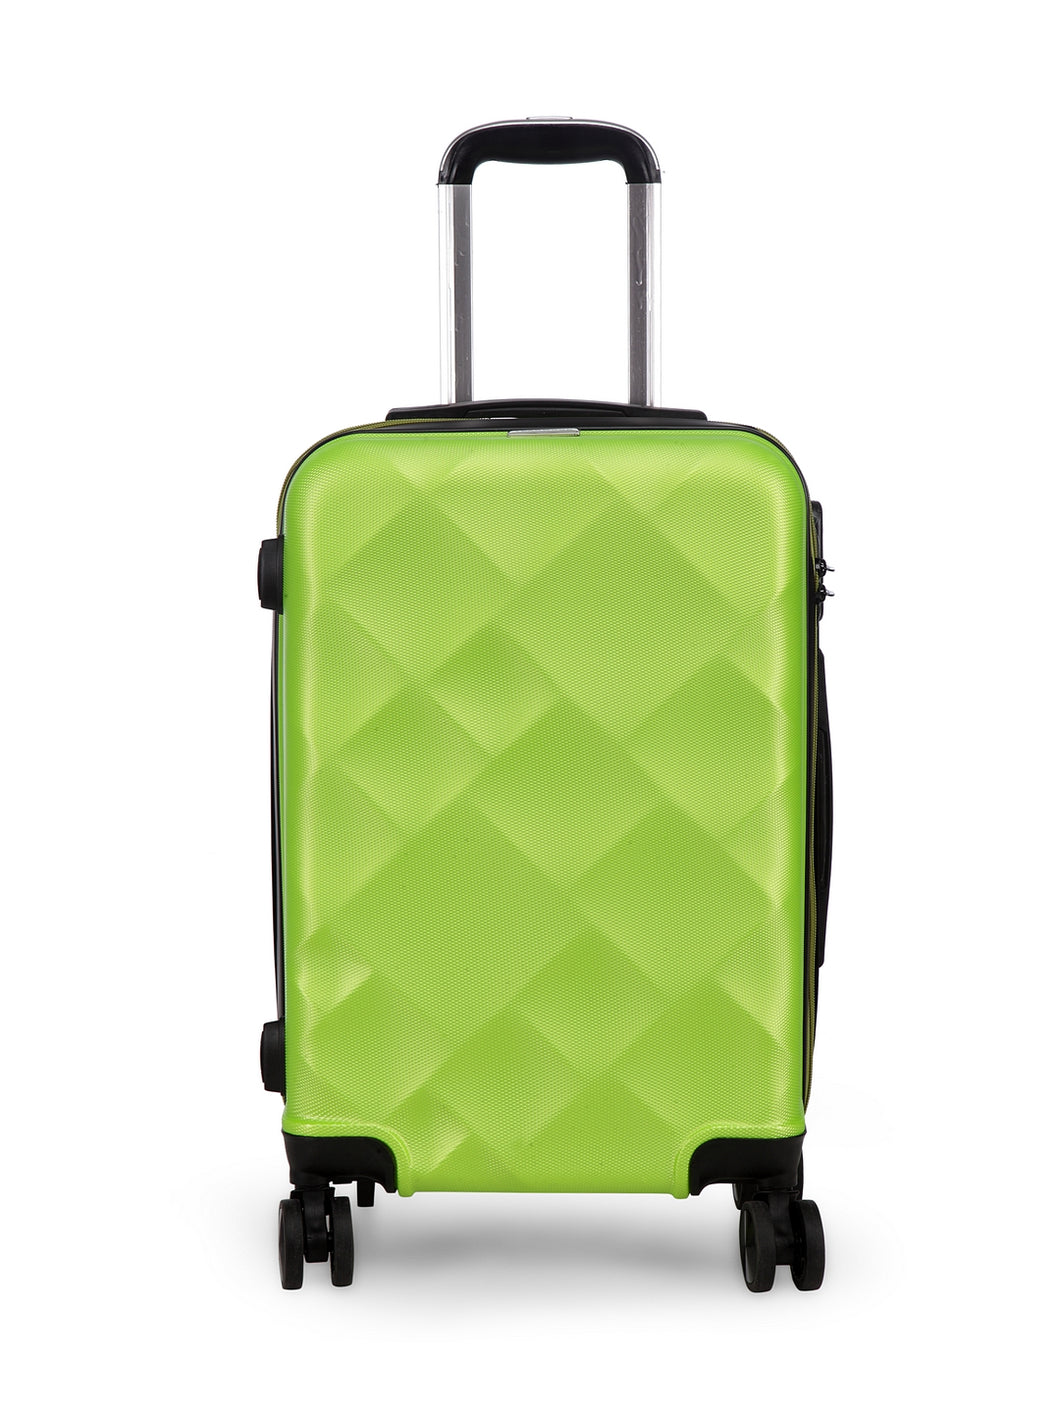 Unisex Green Textured Hard-Sided Cabin Trolley Suitcase